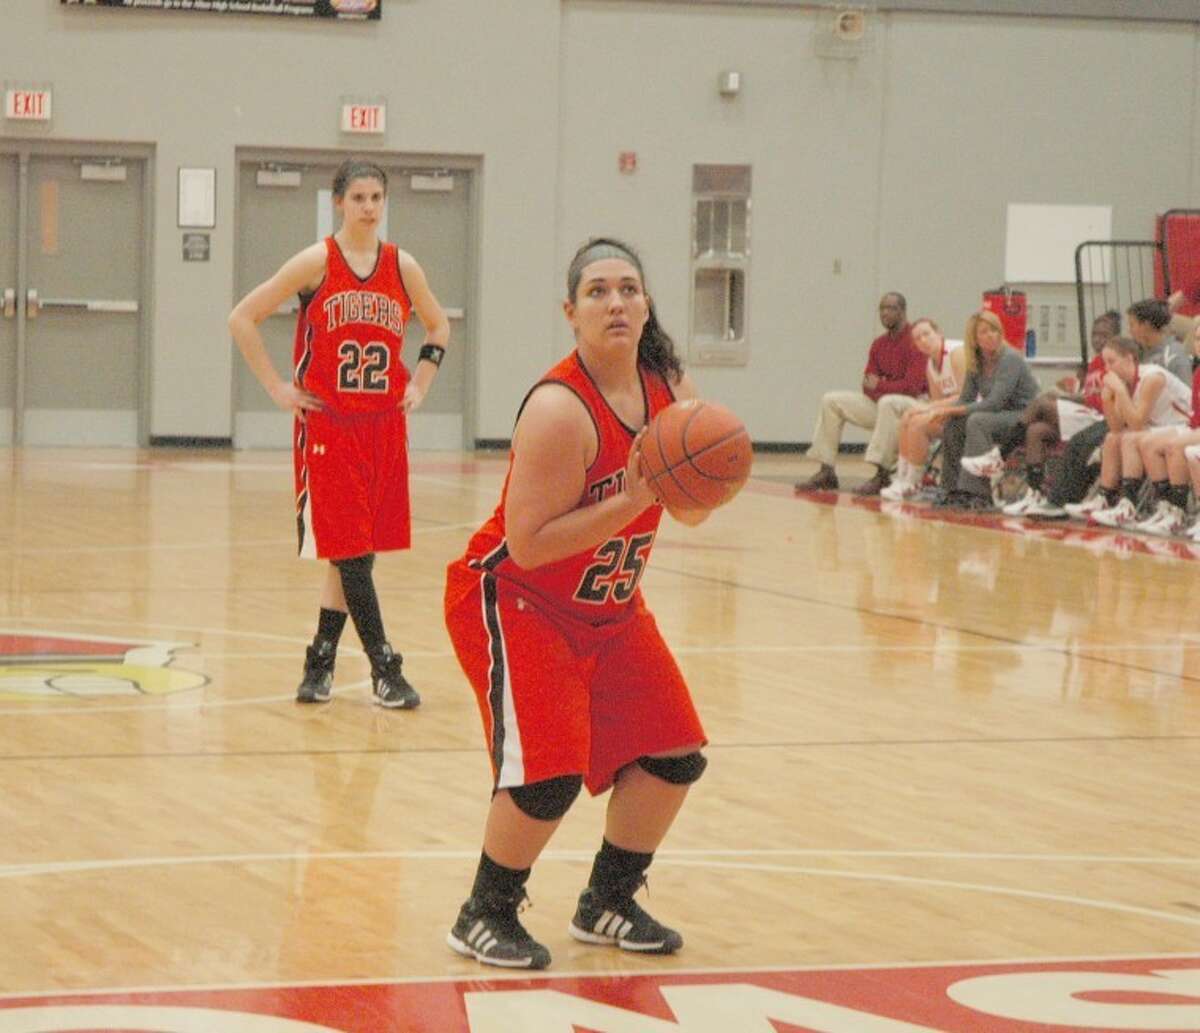 Tiger Erin Bell attempts a free throw during the fourth quarter in Alton. Edwardsville defeated the Redbirds 82-15.